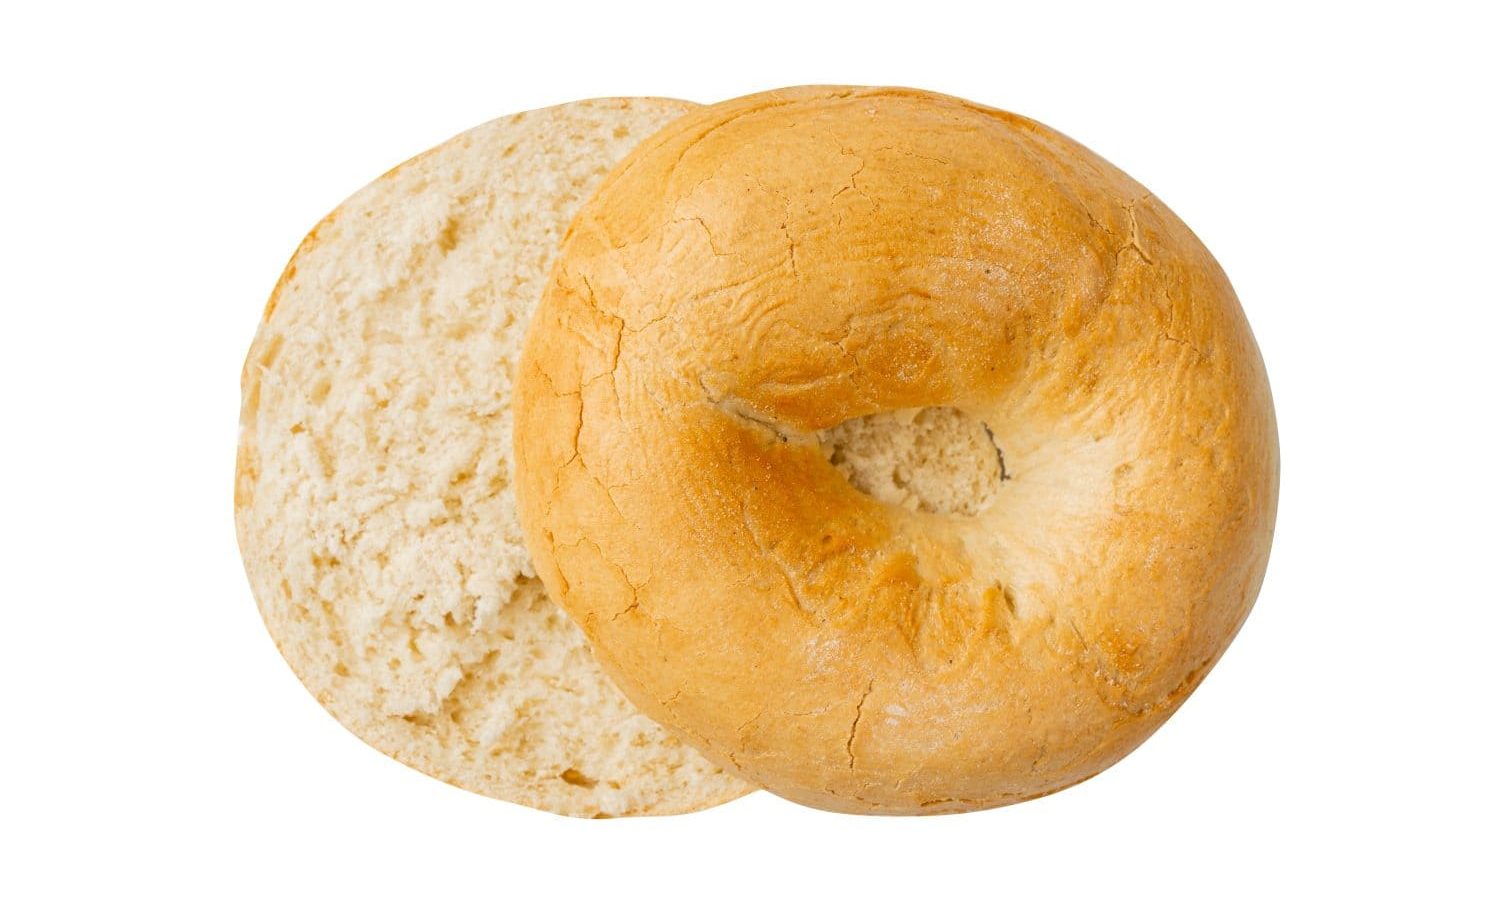 Halved Bagel Isolated, One Round Bread Bun, Wheat Bakery for Breakfast, Plain Circle Bagel Bread on White Background